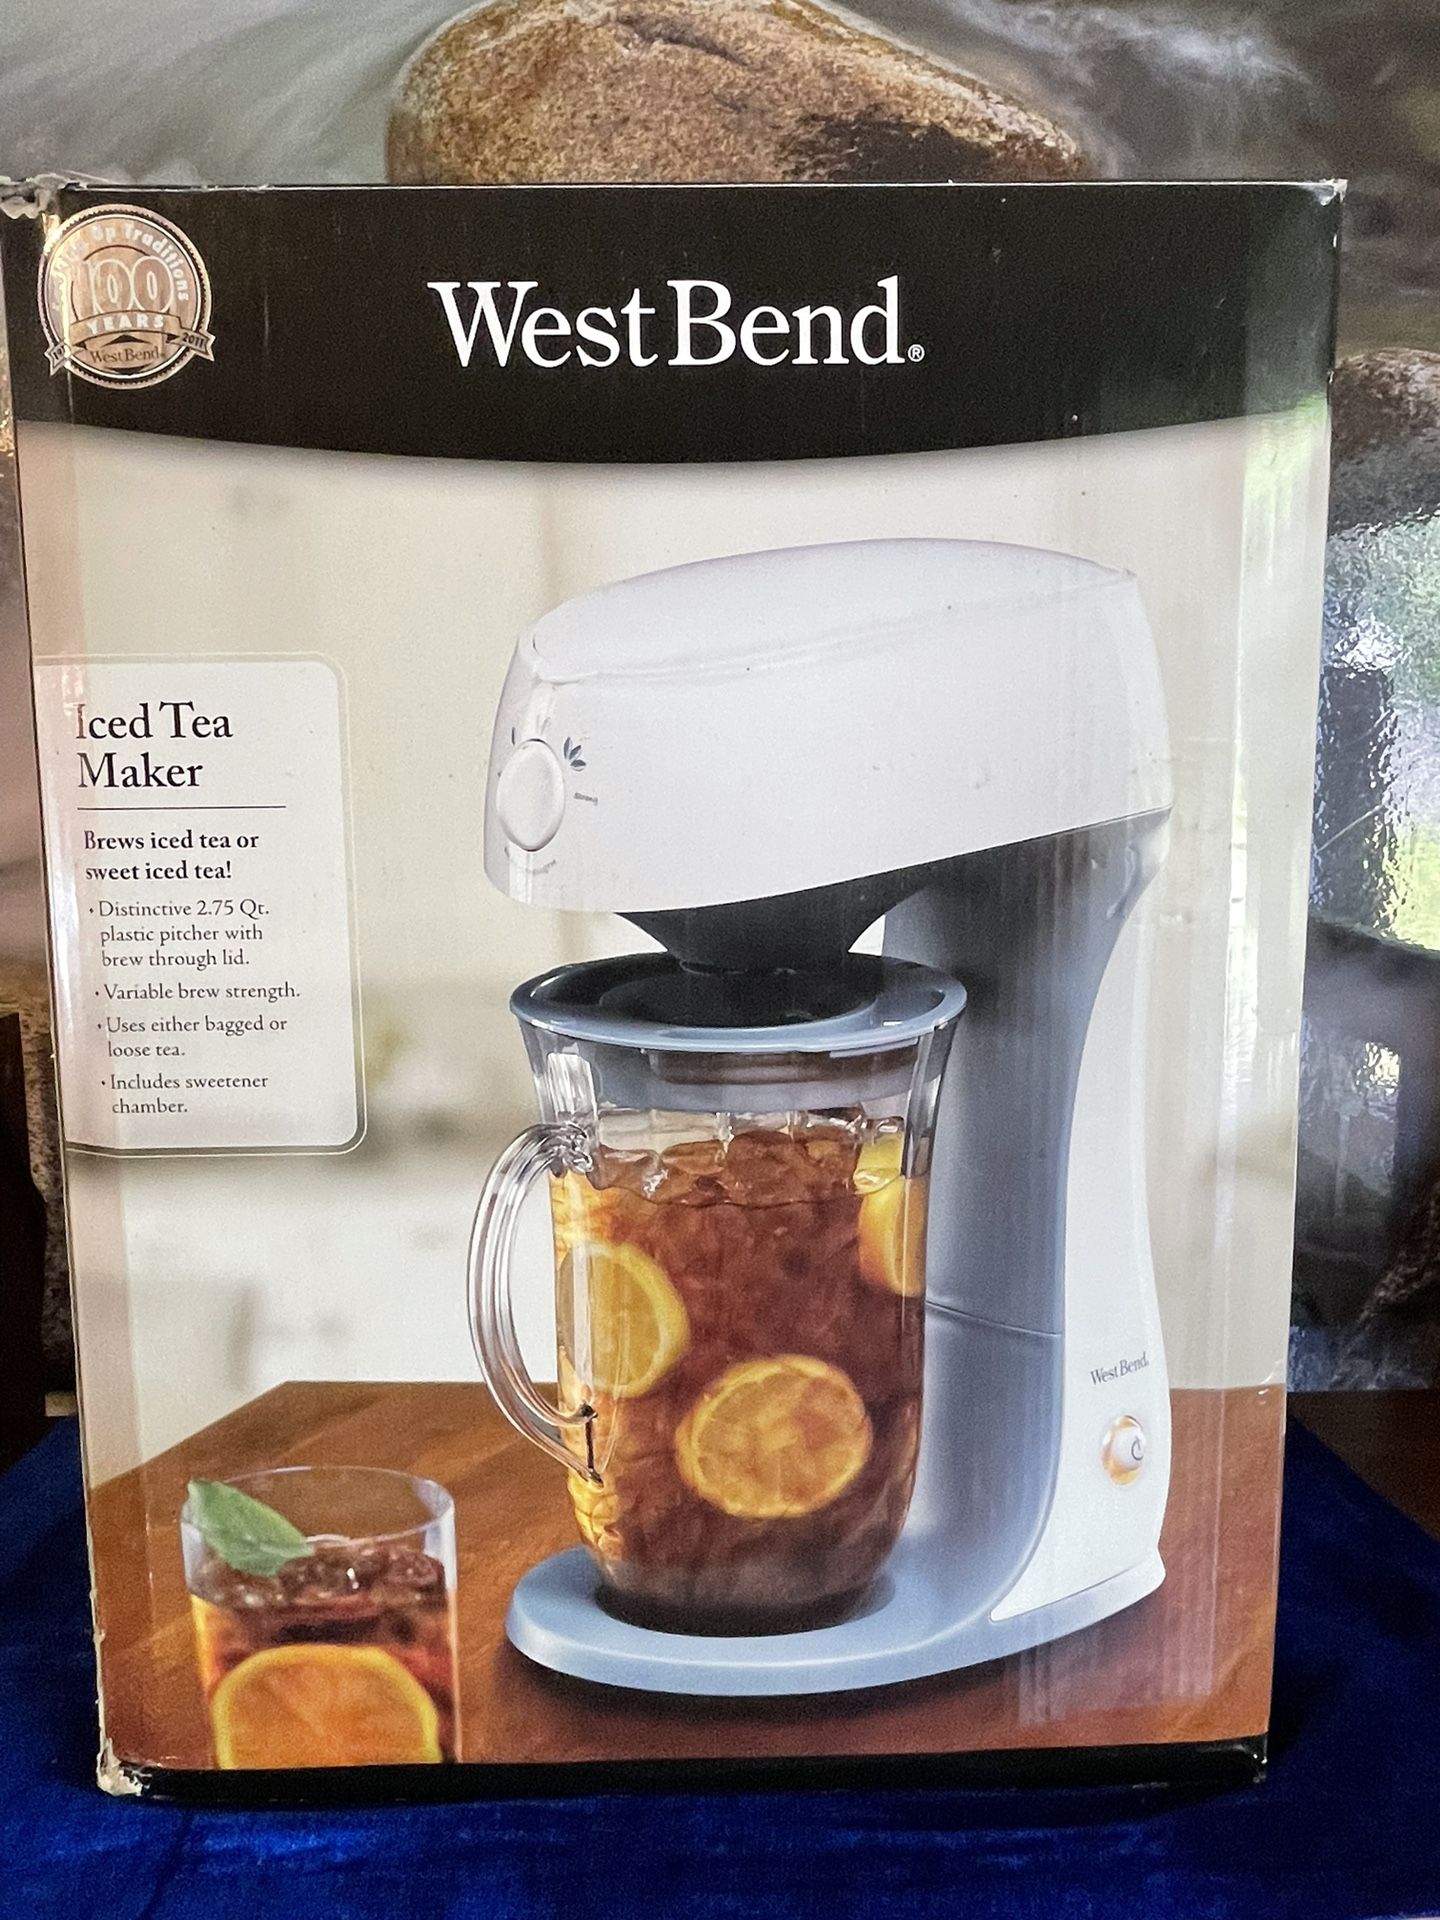 New West Bend 2.7-Quart iced tea maker, White never unpacked. All proceeds  go towards my cancer treatment and recovery. Thank you and god bless for